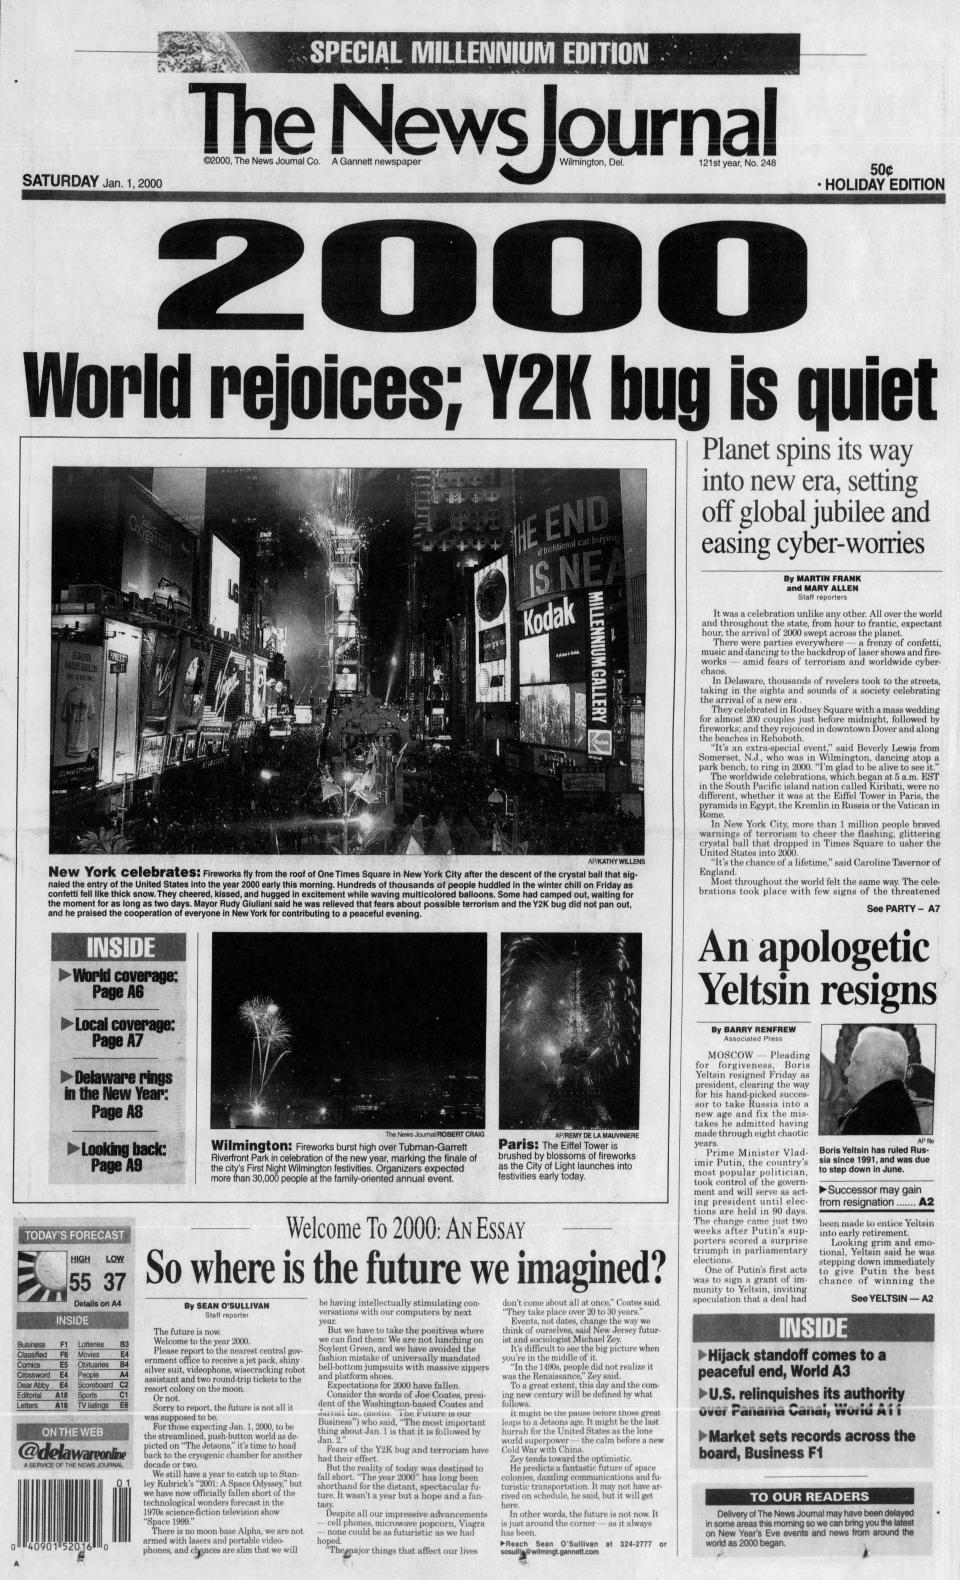 Front page of The News Journal from Jan. 1, 2000.